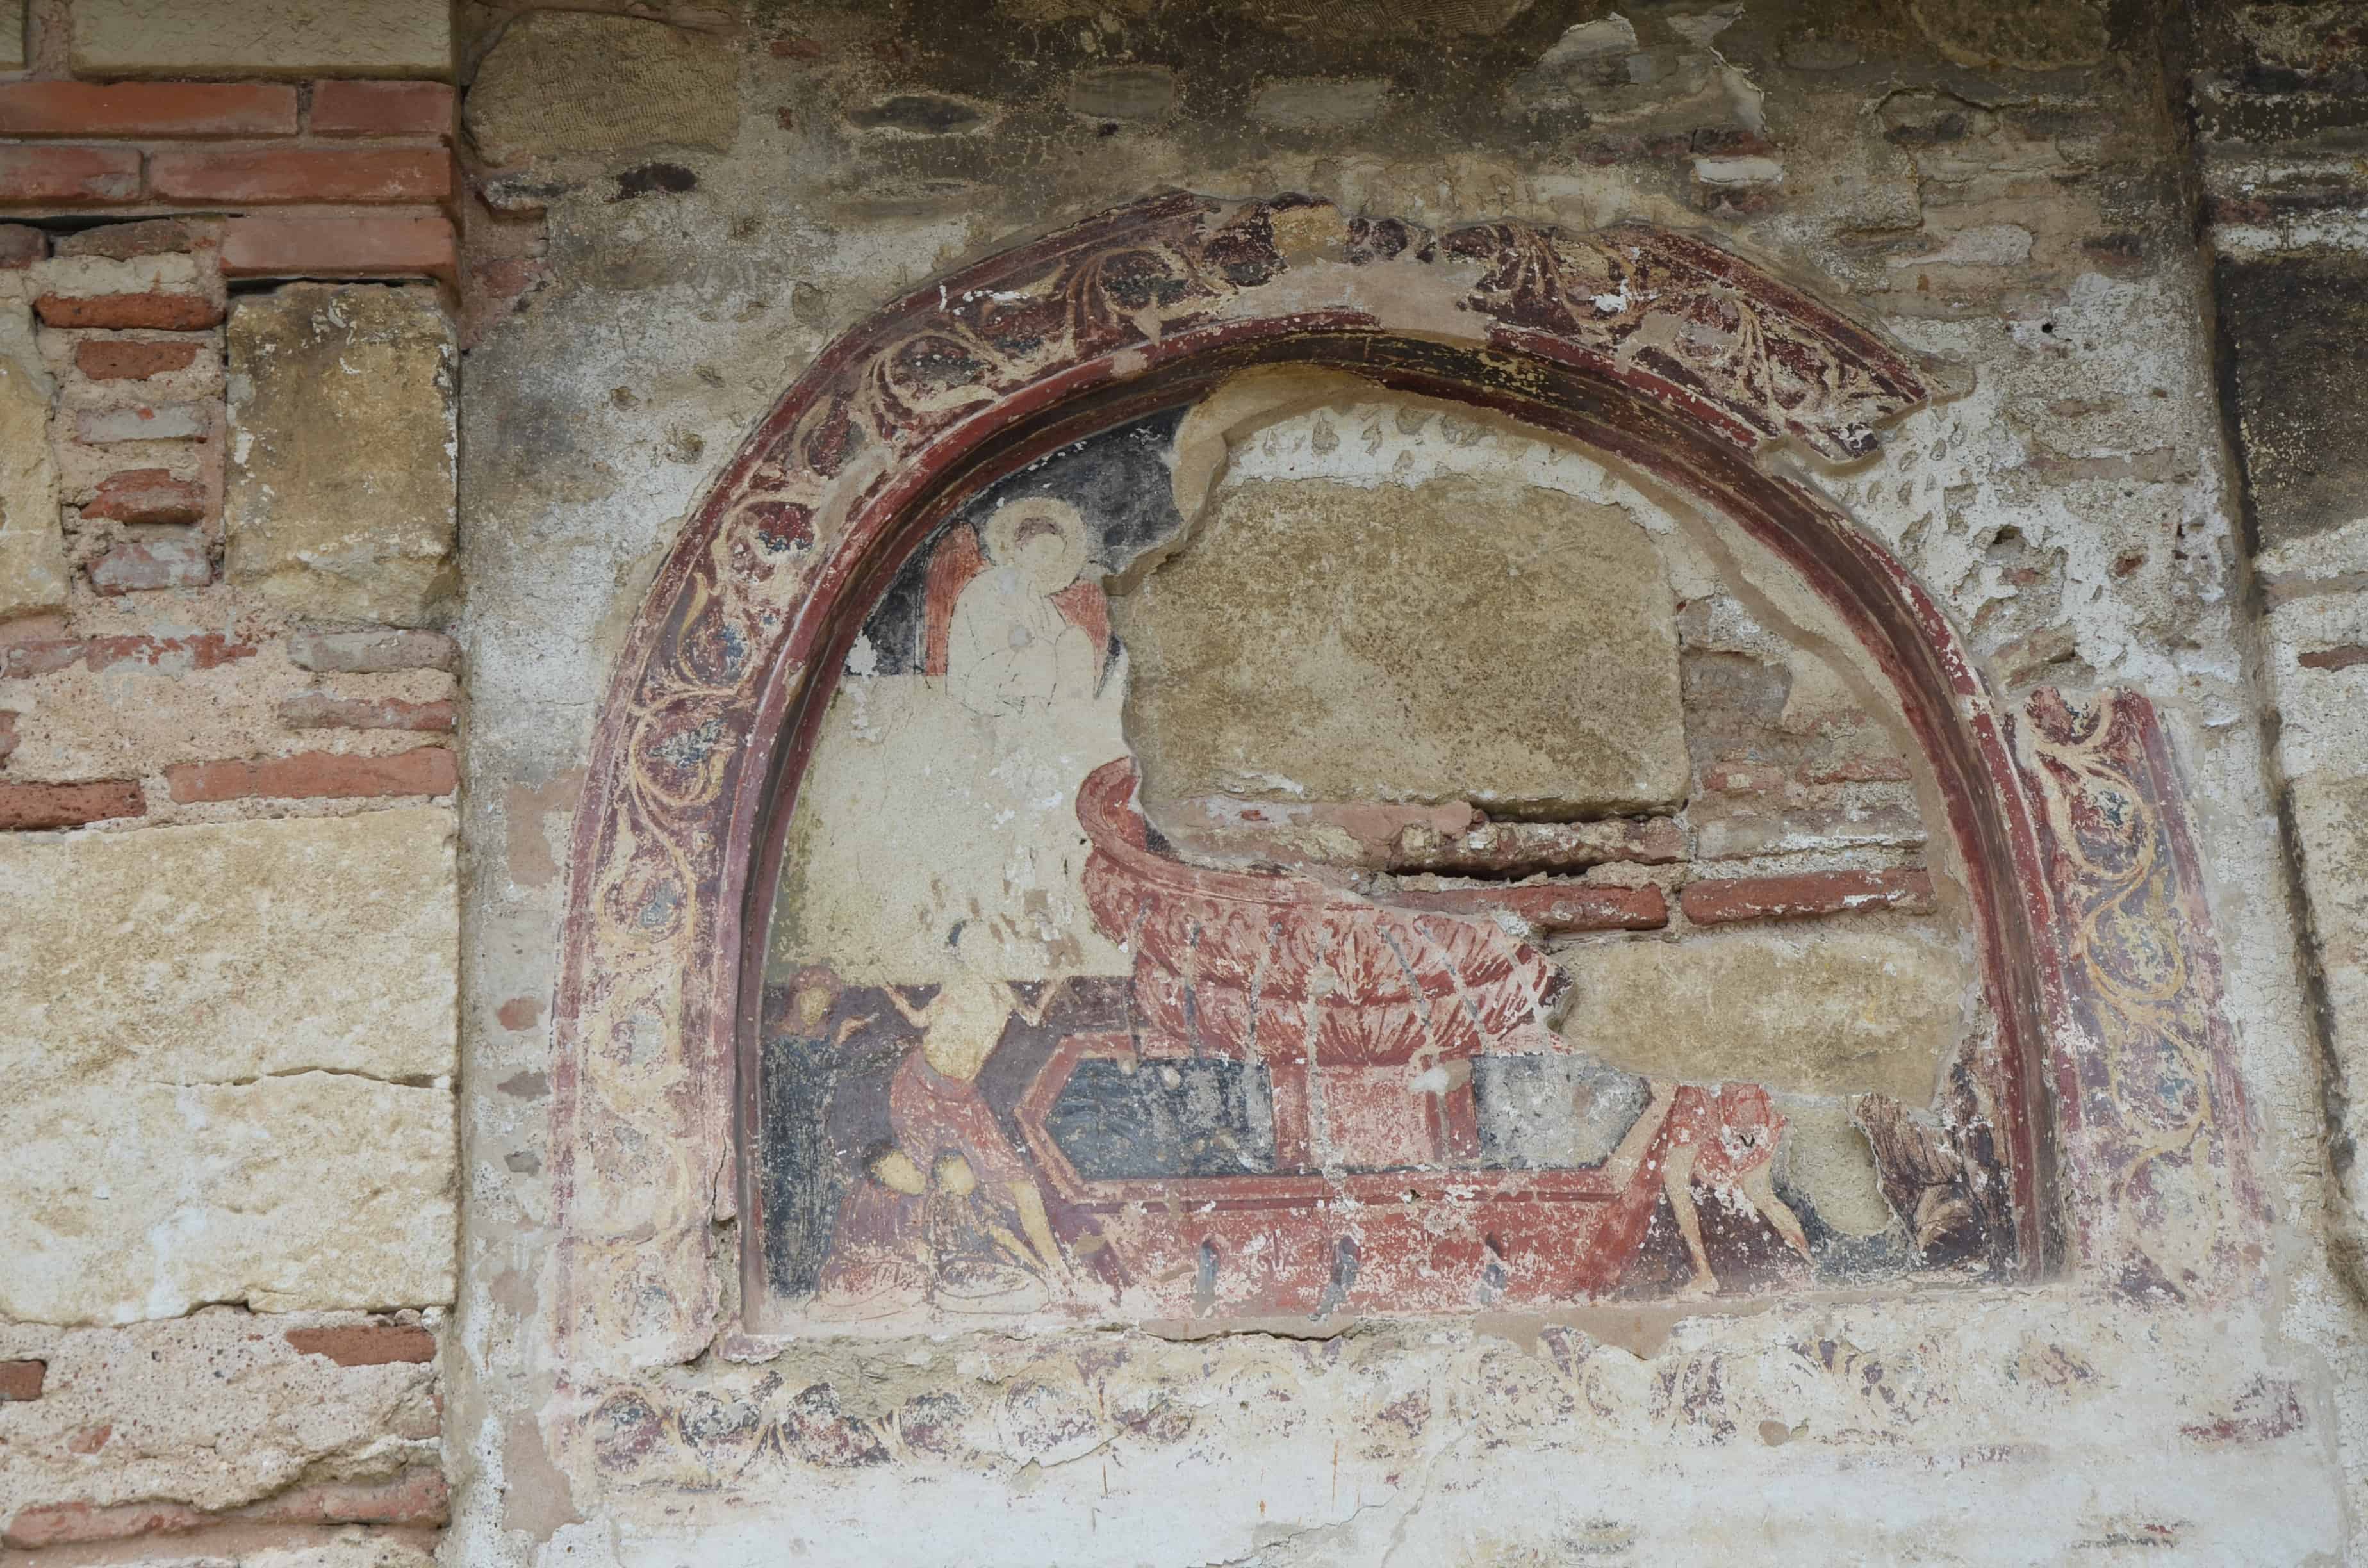 Damaged fresco in the nave at the Church of Saint Stephen in Nessebar, Bulgaria